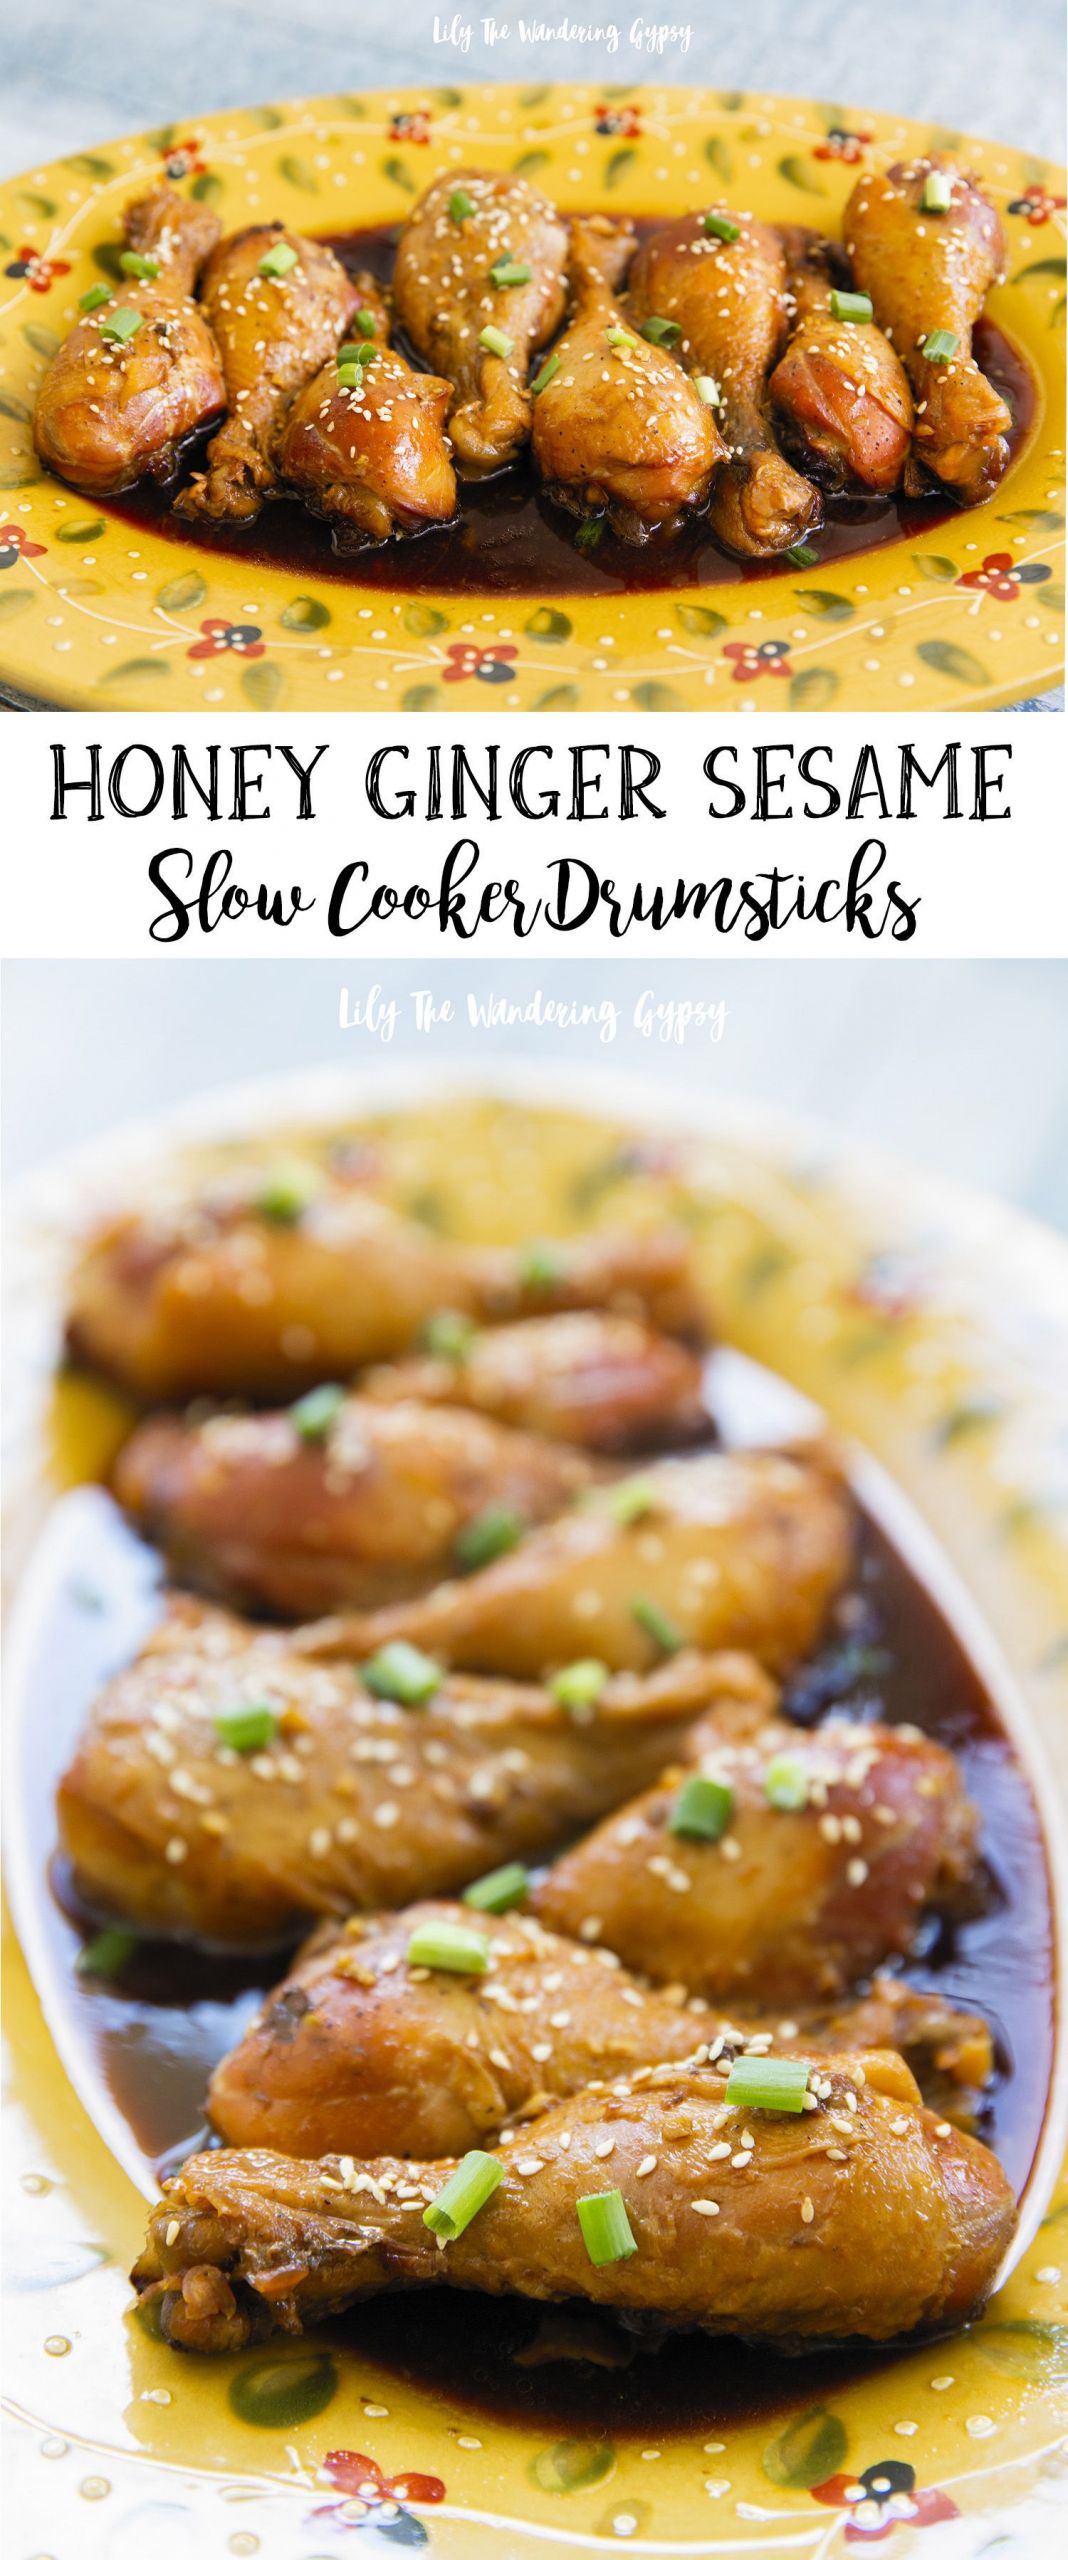 Healthy Chicken Drumstick Slow Cooker Recipes
 Delicious Slow Cooker Honey Ginger Chicken Drumsticks